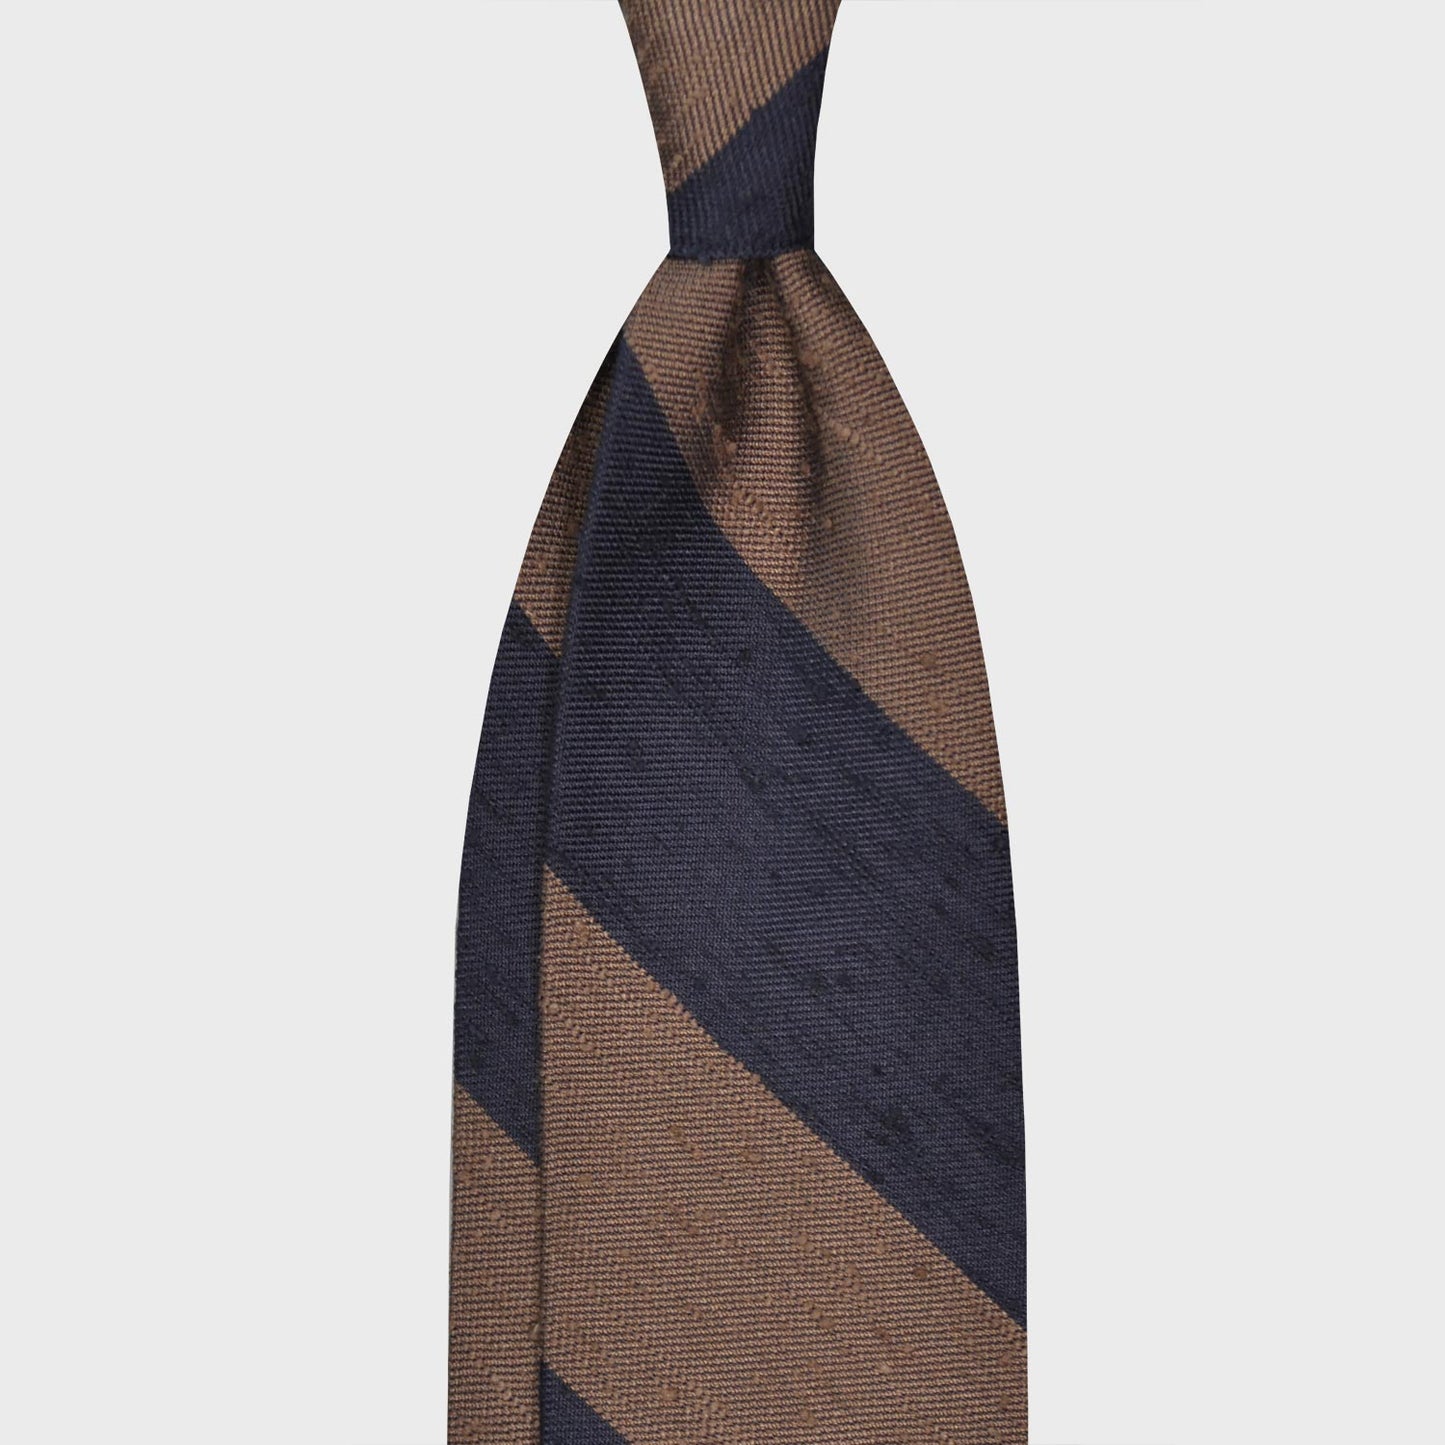 Dark Taupe Shantung Silk Tie Regimental Wide Striped. Formal shantung tie with wide striped navy blue and dark taupe, ideal for refined outfits four seasons, handmade in Italy by F.Marino exclusive for Wools Boutique Uomo, unlined tie 3 folds with hand rolled edge.